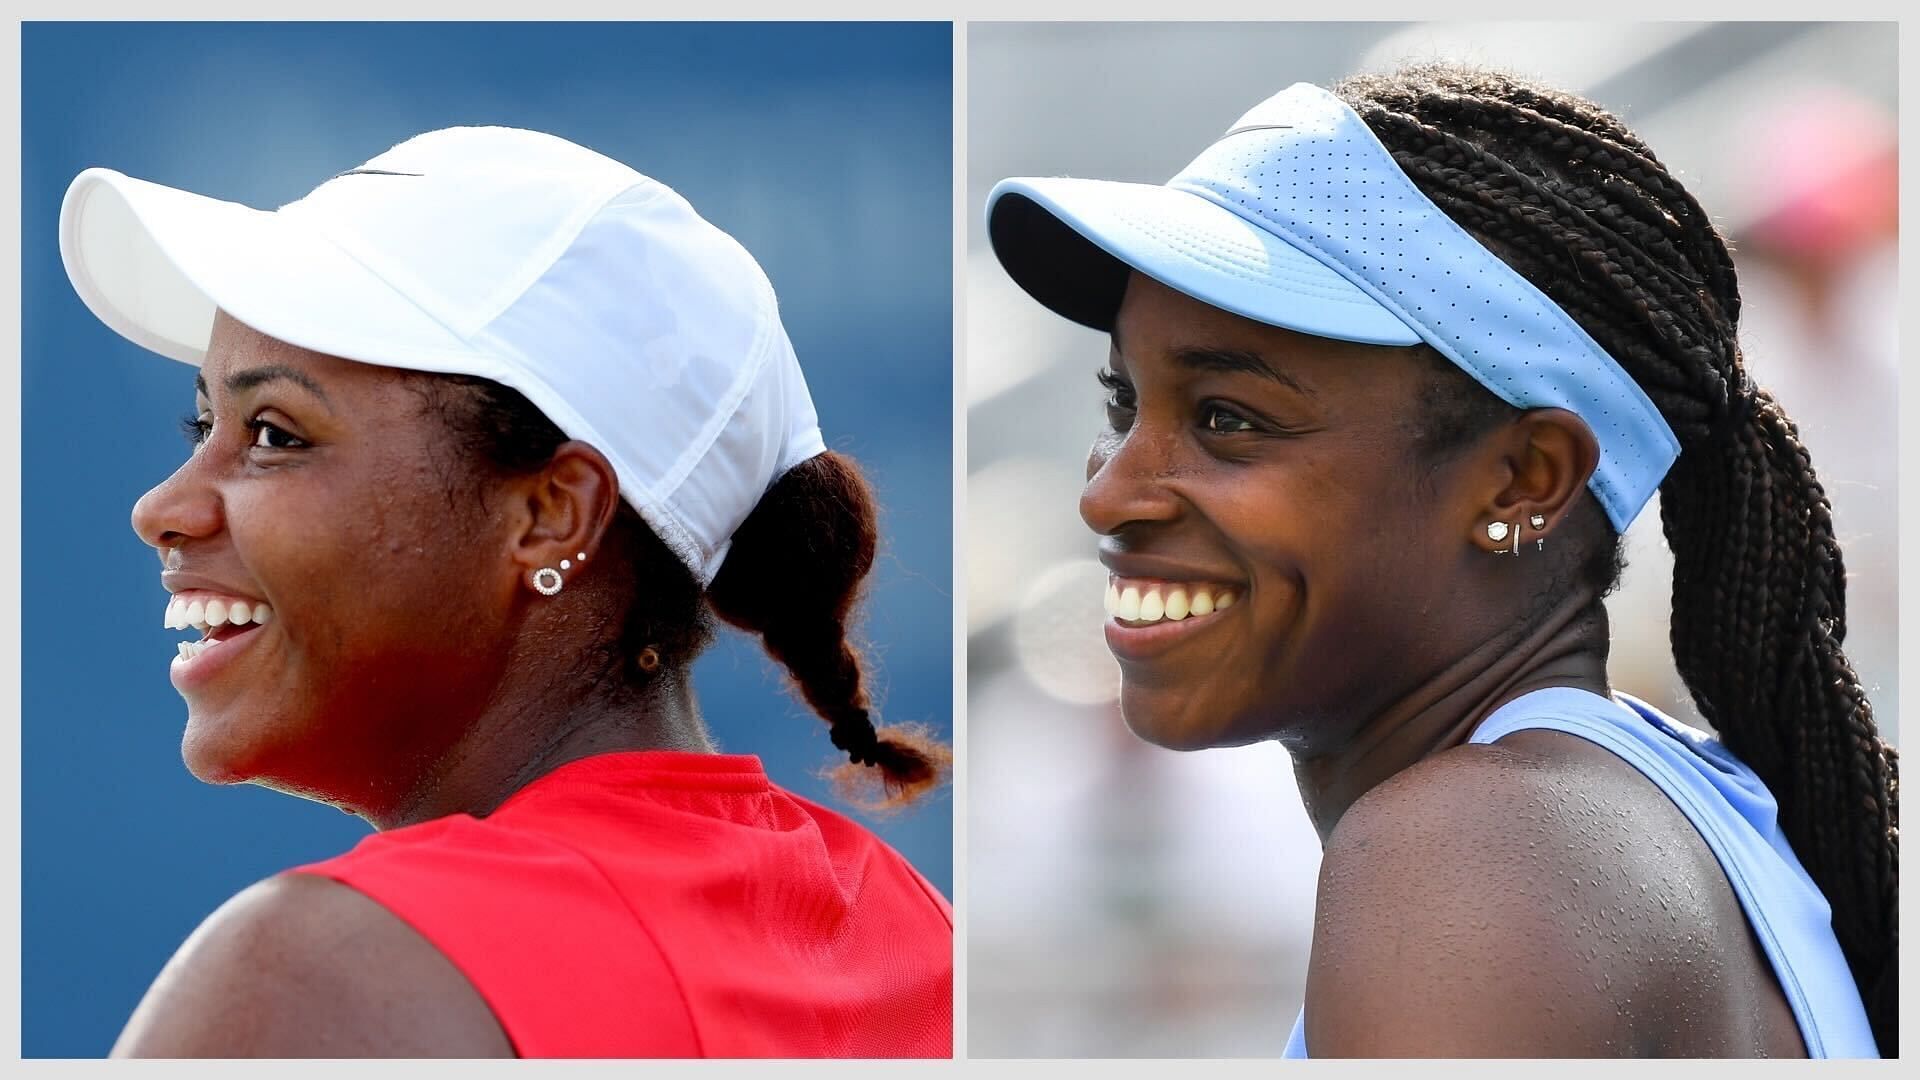 Sloane Stephens and Taylor Townsend joke about jet lag ahead of Madrid Open